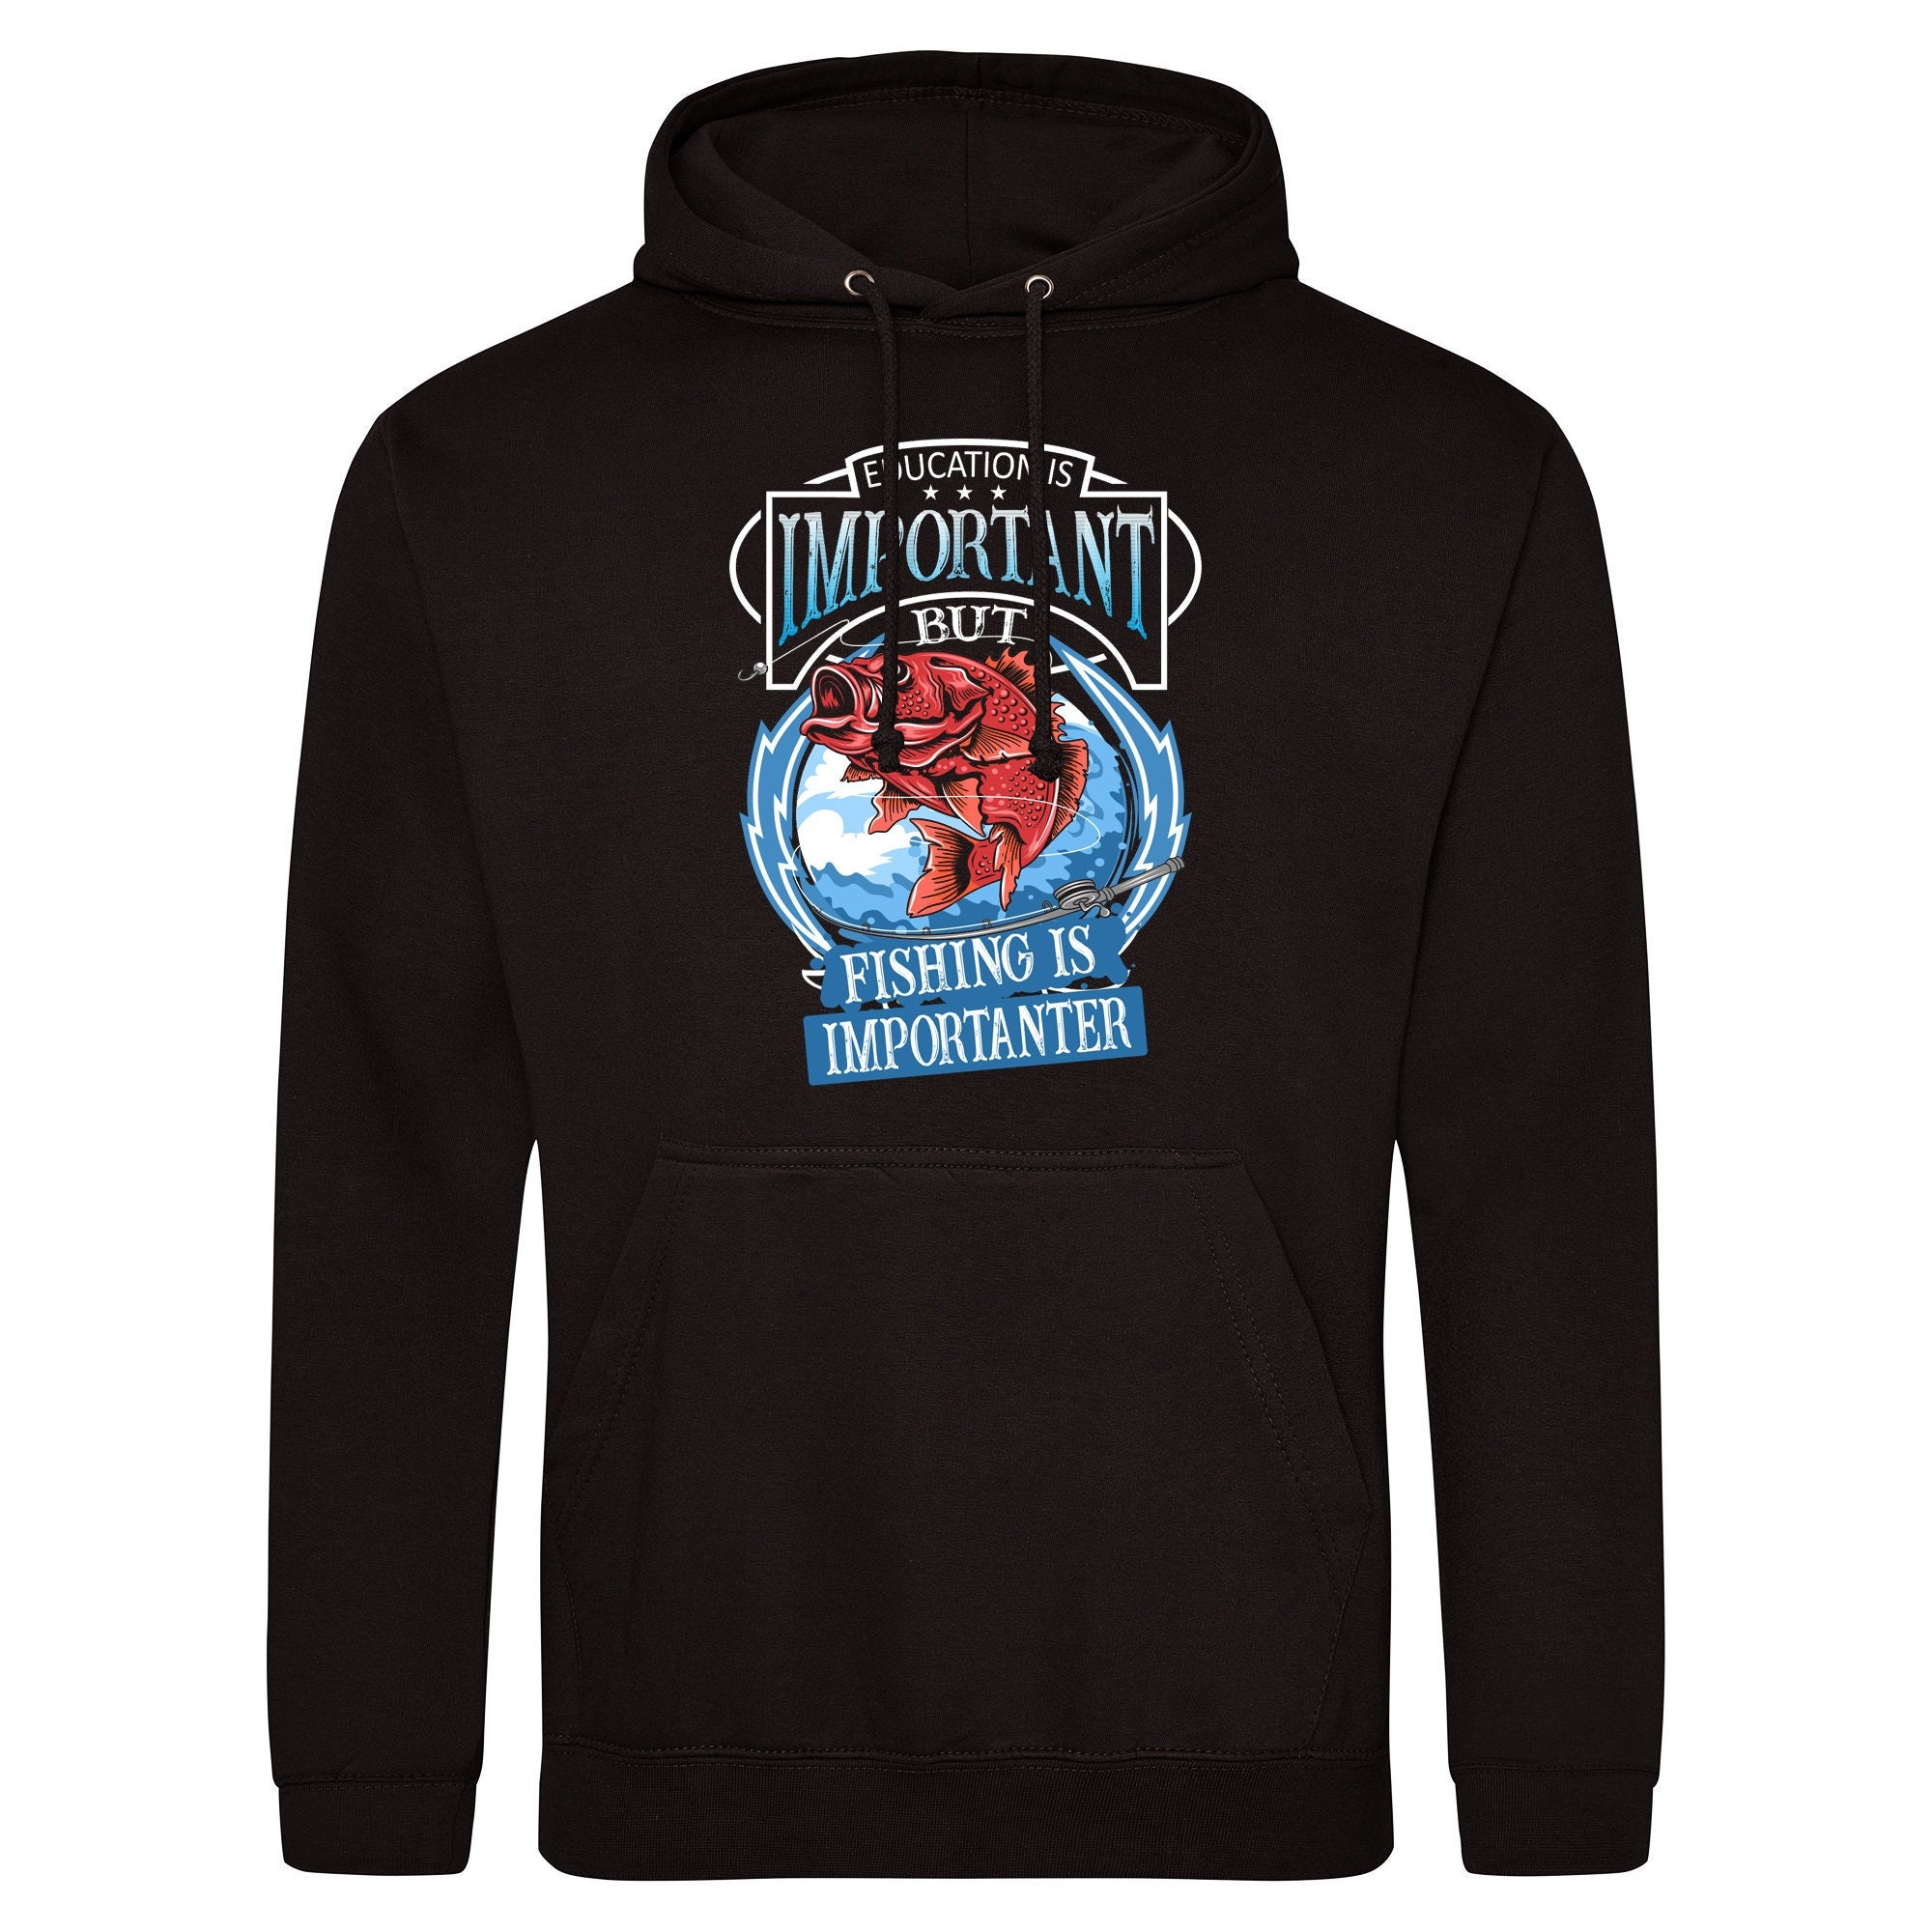 Catch 'em All Black Fishing Hoodie With a Fishing Design Gift